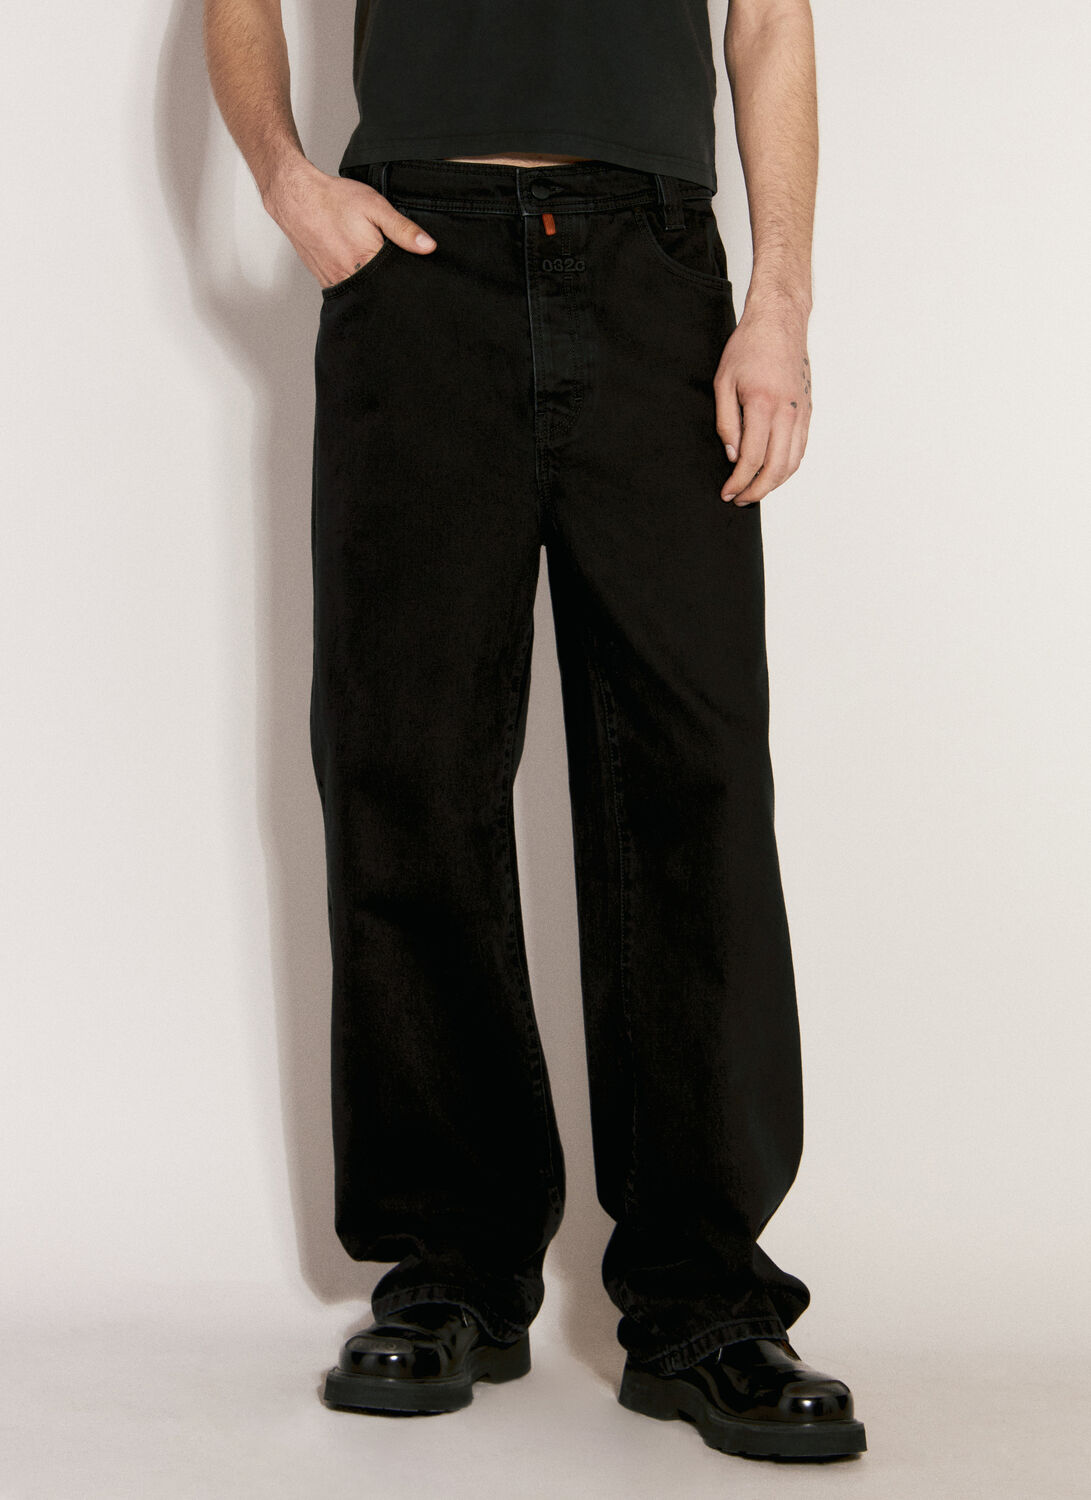 032c Logo Embroidery Baggy Jeans In Black